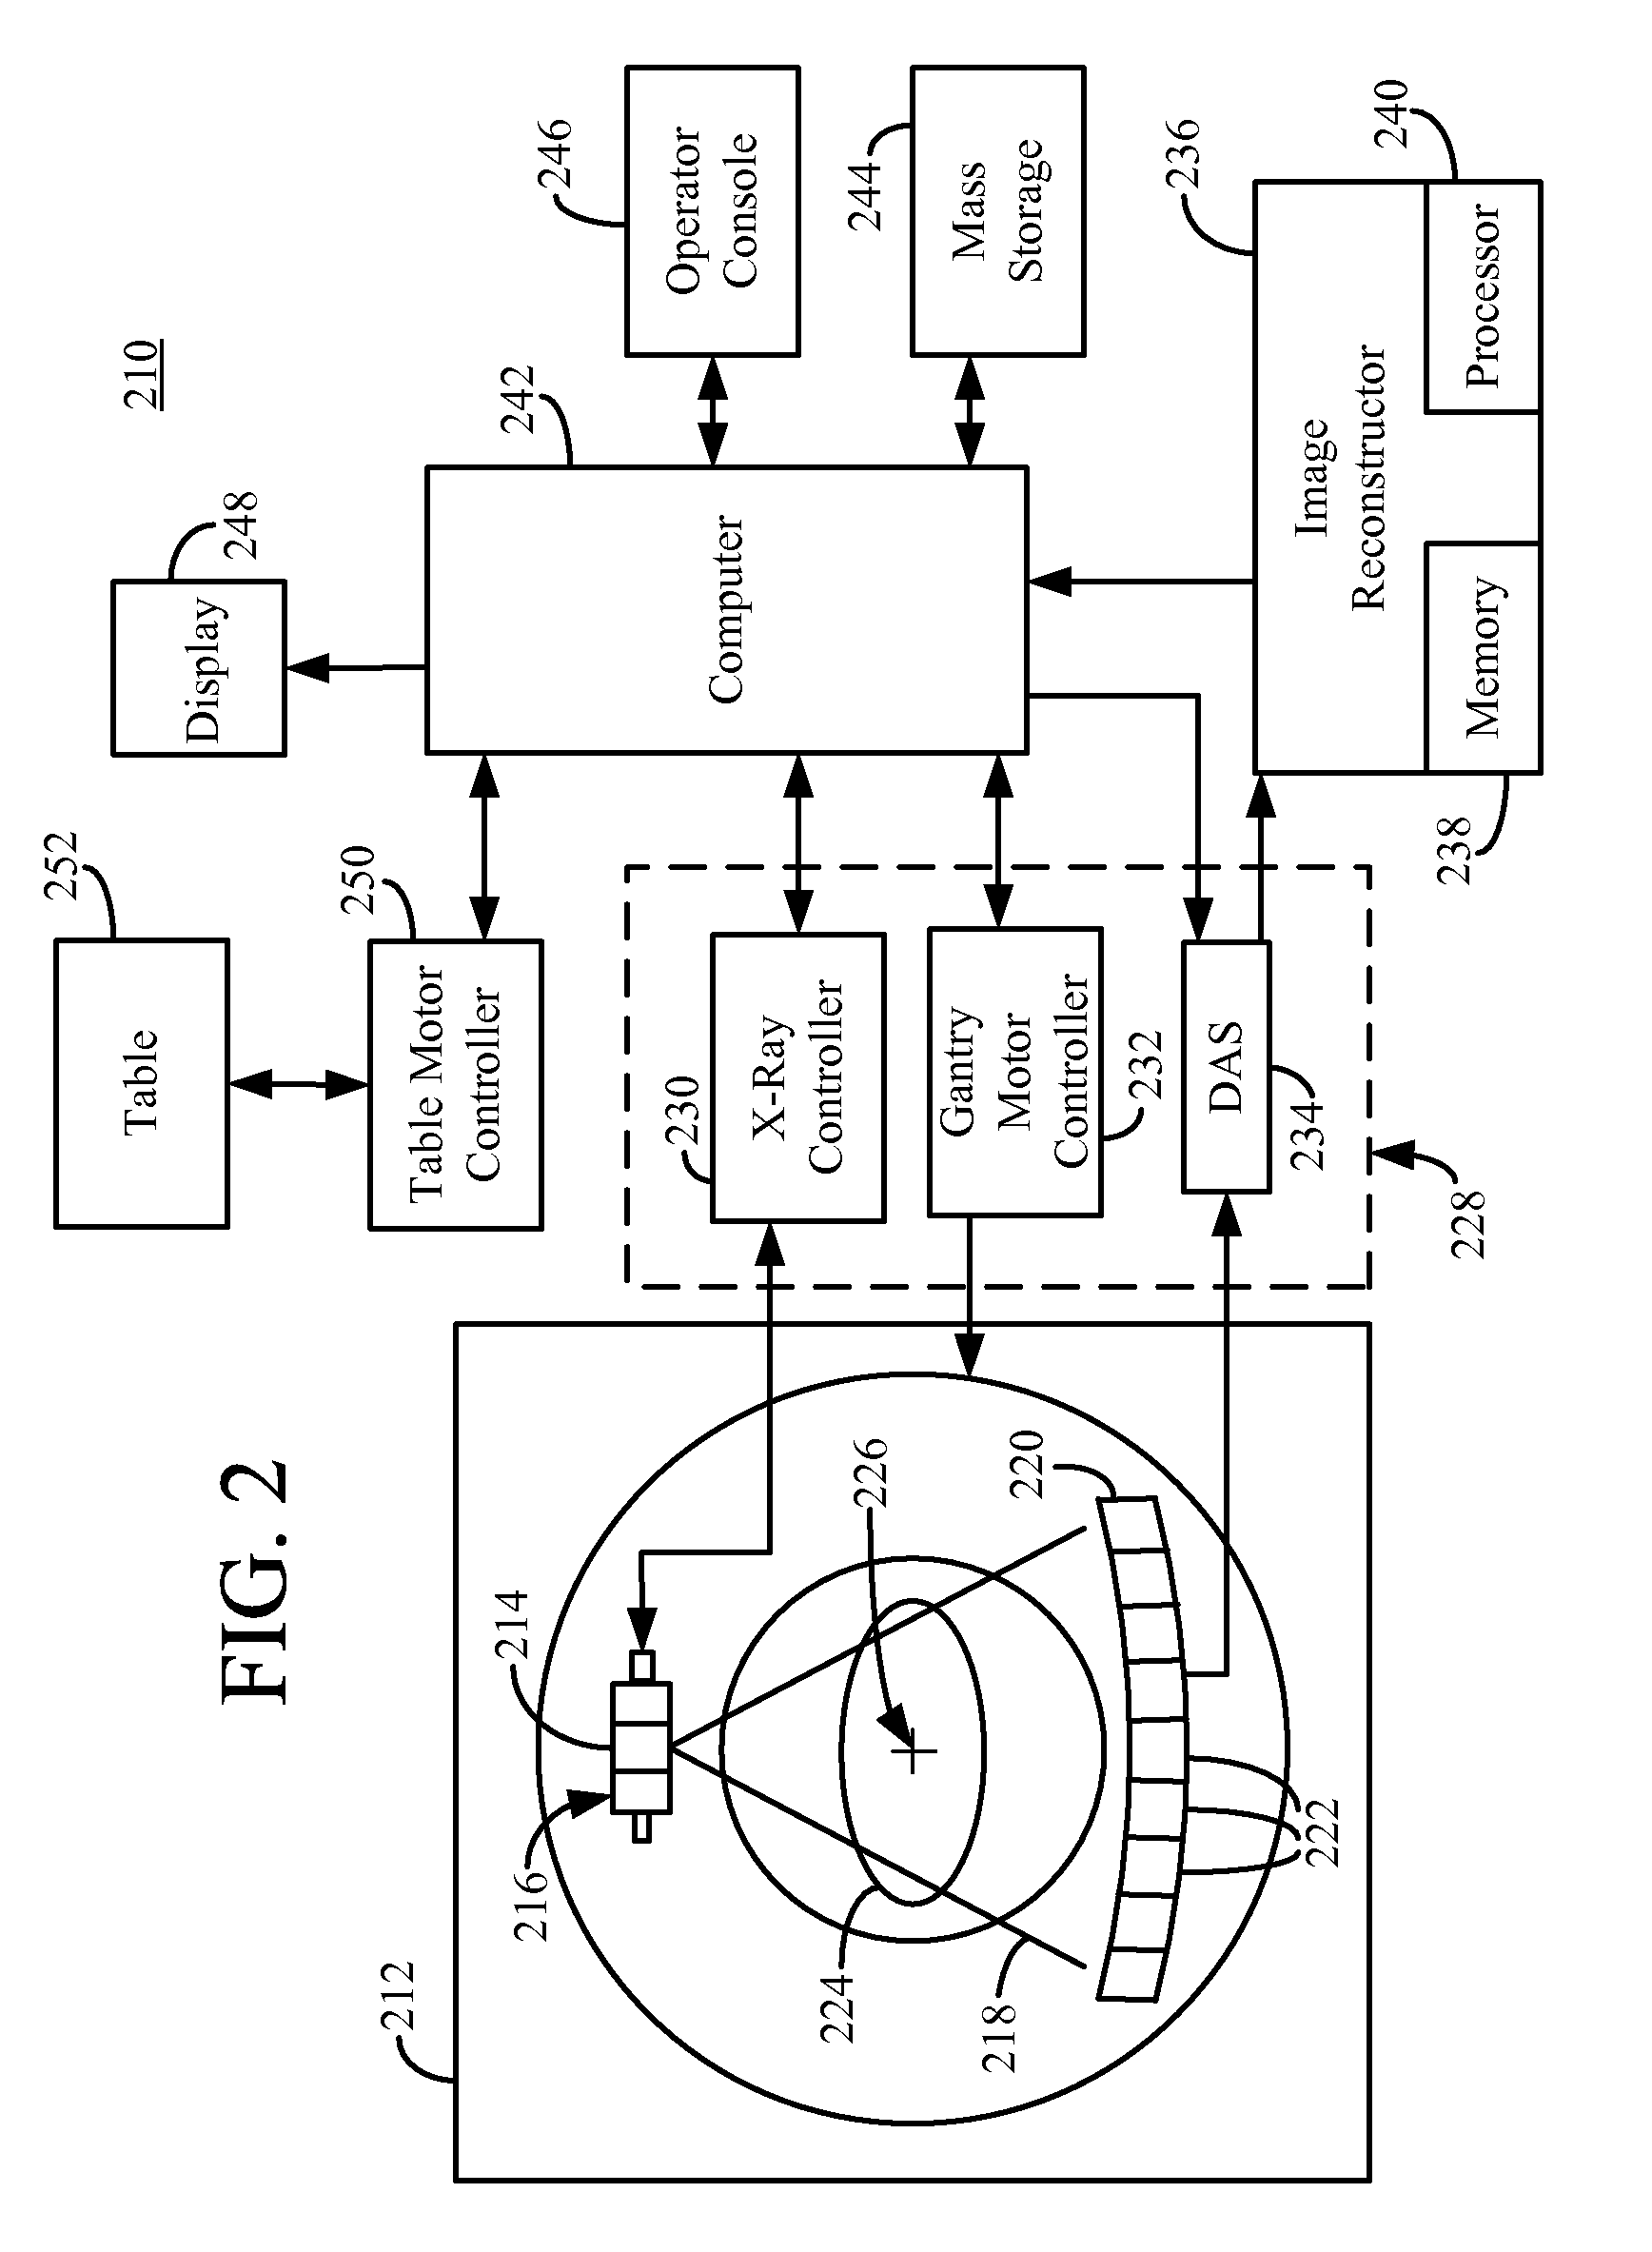 Systems and apparatus for integrated X-Ray tube cooling